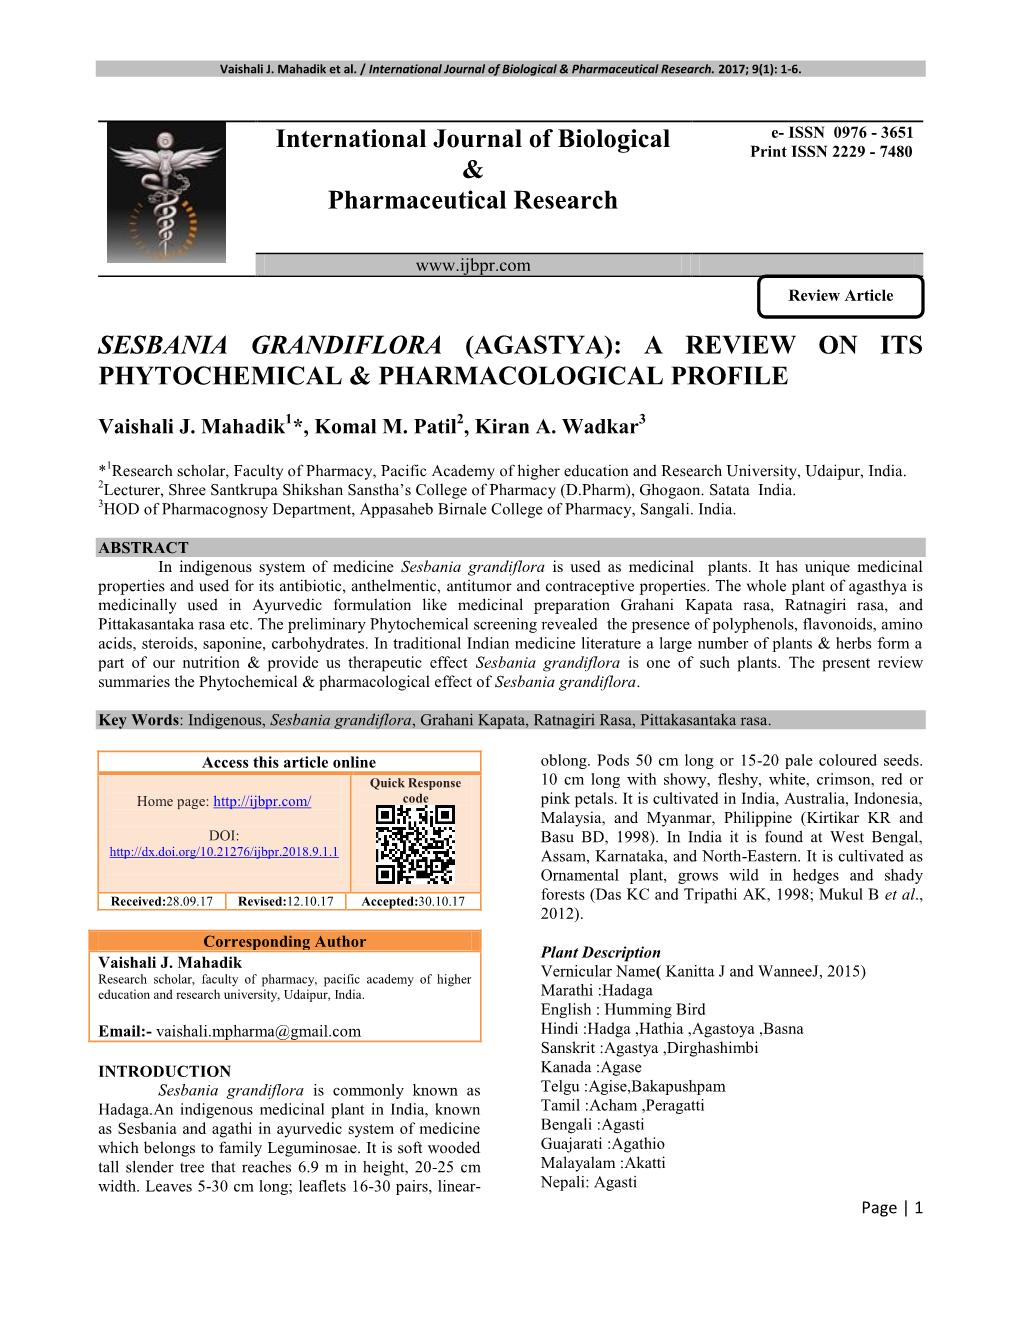 Sesbania Grandiflora (Agastya): a Review on Its Phytochemical & Pharmacological Profile